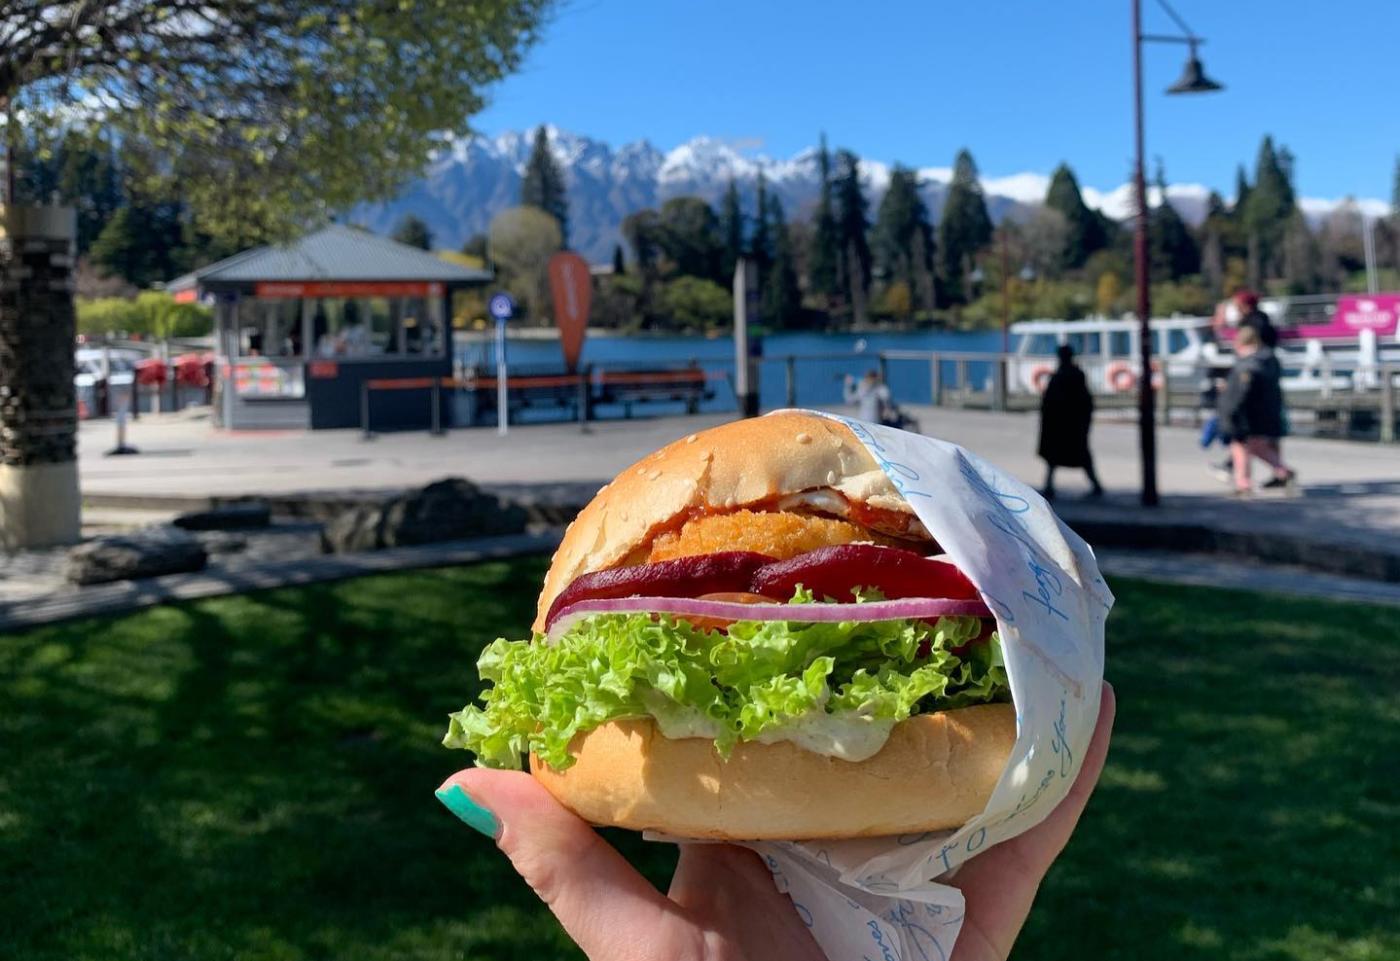 Holding a fergburger with view of the Remarkables mountains in the background